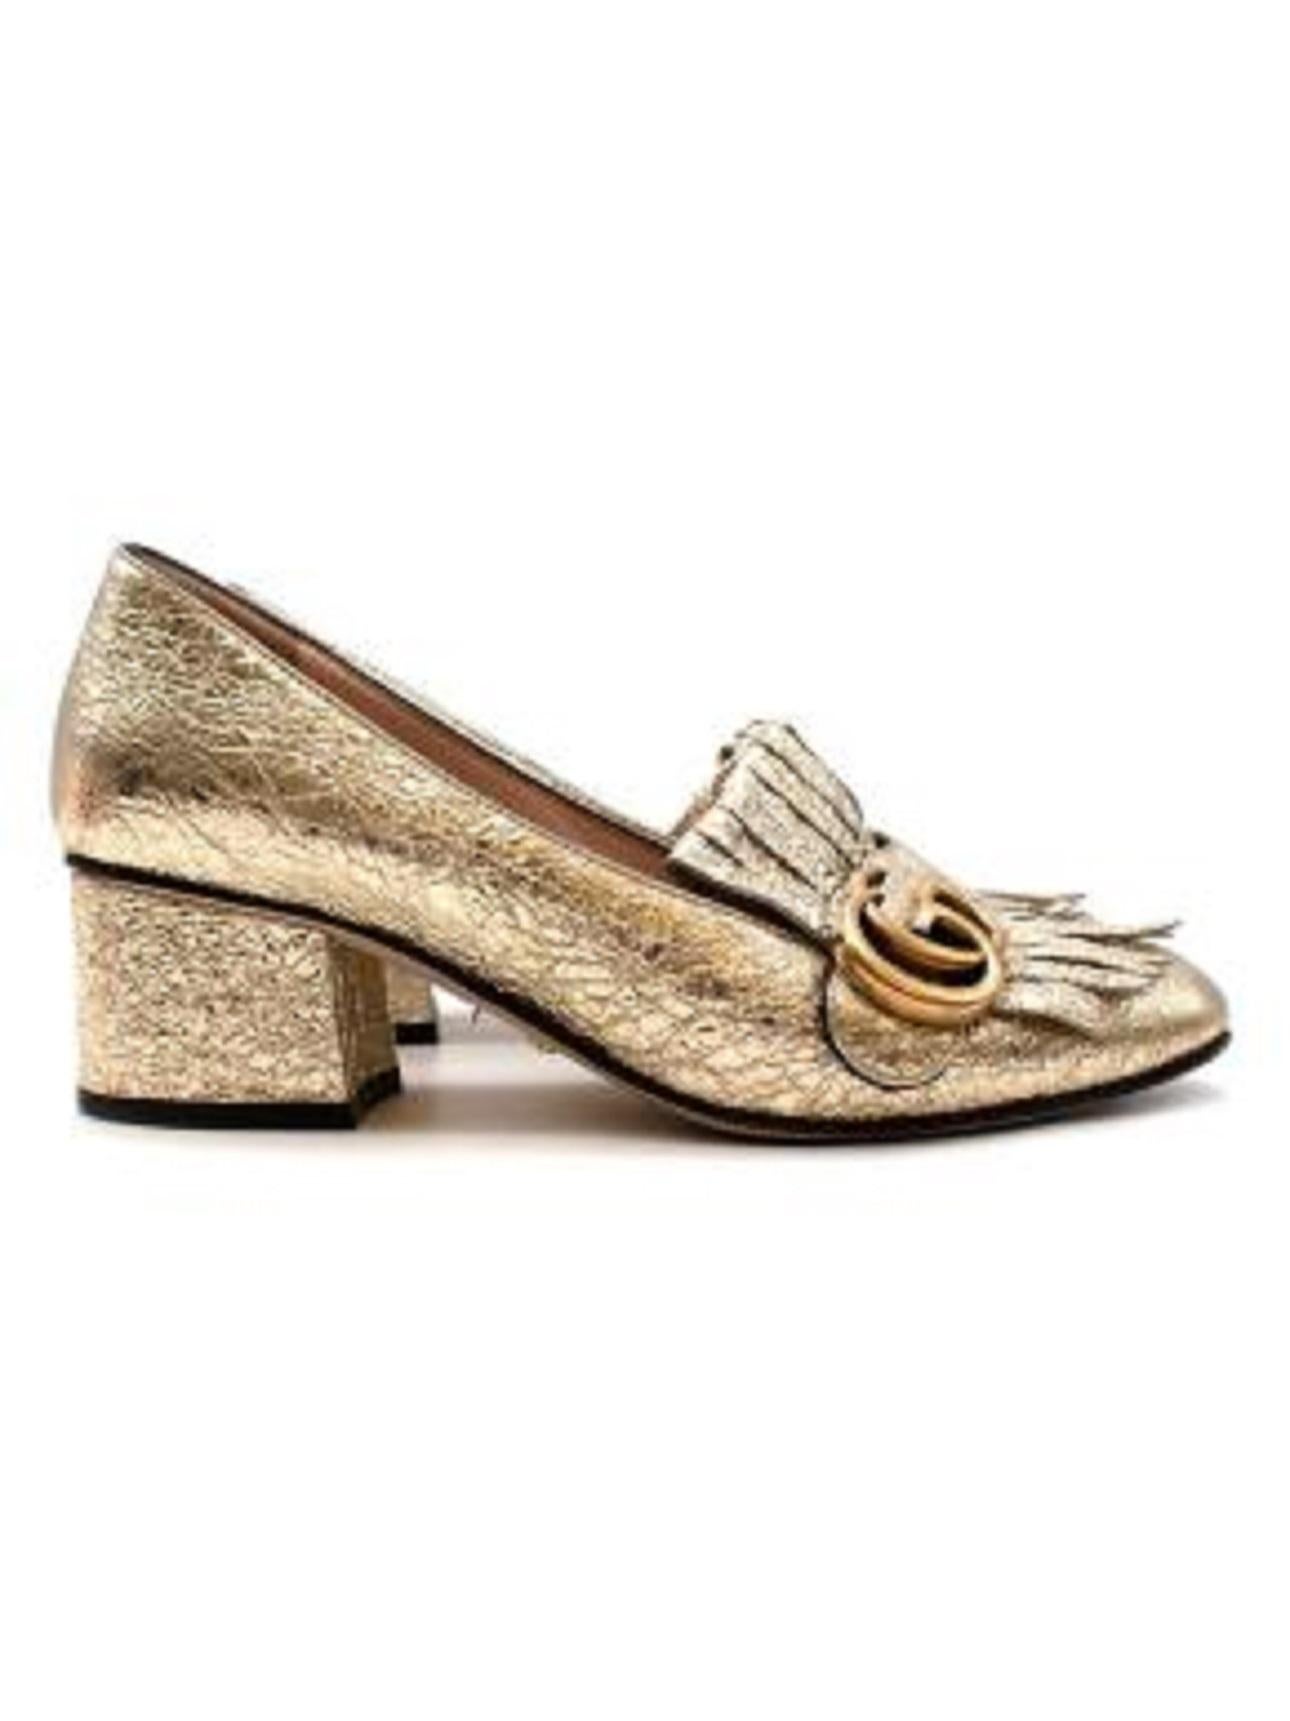 Gucci Metallic GG logo heels

-Platinum metallic laminate leather
-Block heel 
-Square toe 
-Branded leather insoles 
-Gold tone GG plaque 
-Rubber soles 

Material: 

Rubber 
Leather 

Made in Italy 

9.5/10 excellent conditions, please refer to